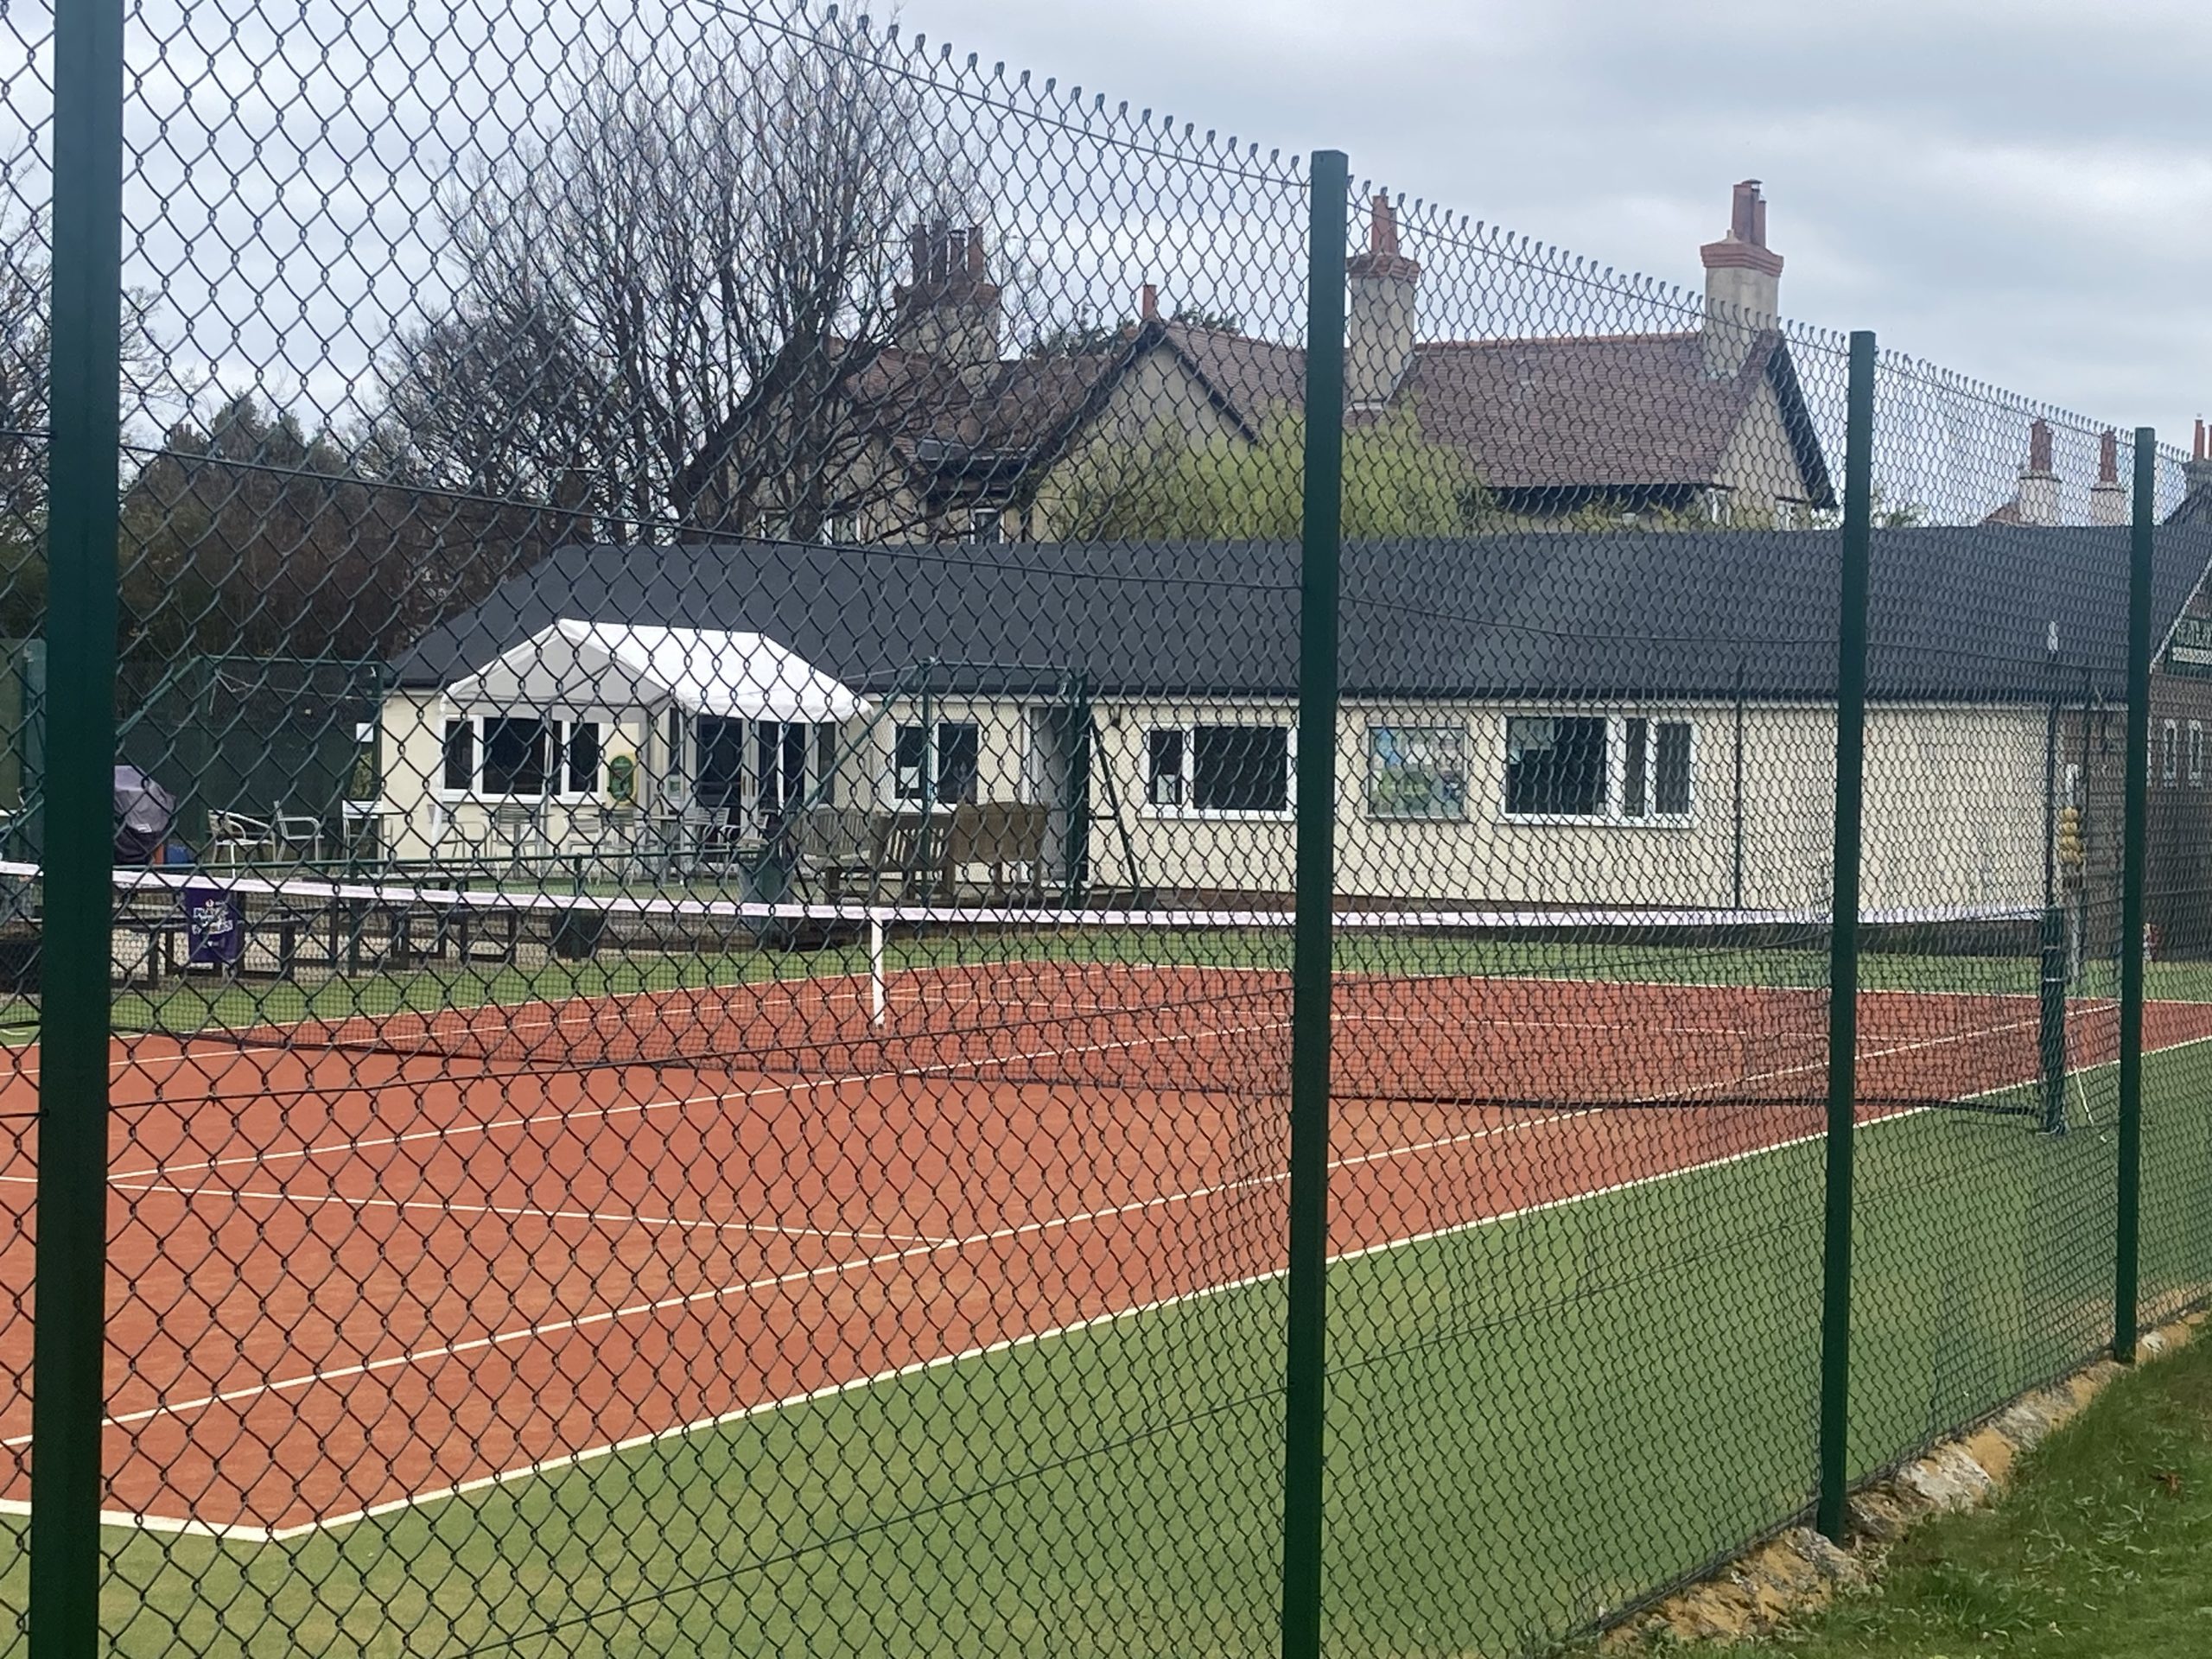 Plan to extend clubhouse at Hoylake Tennis Club